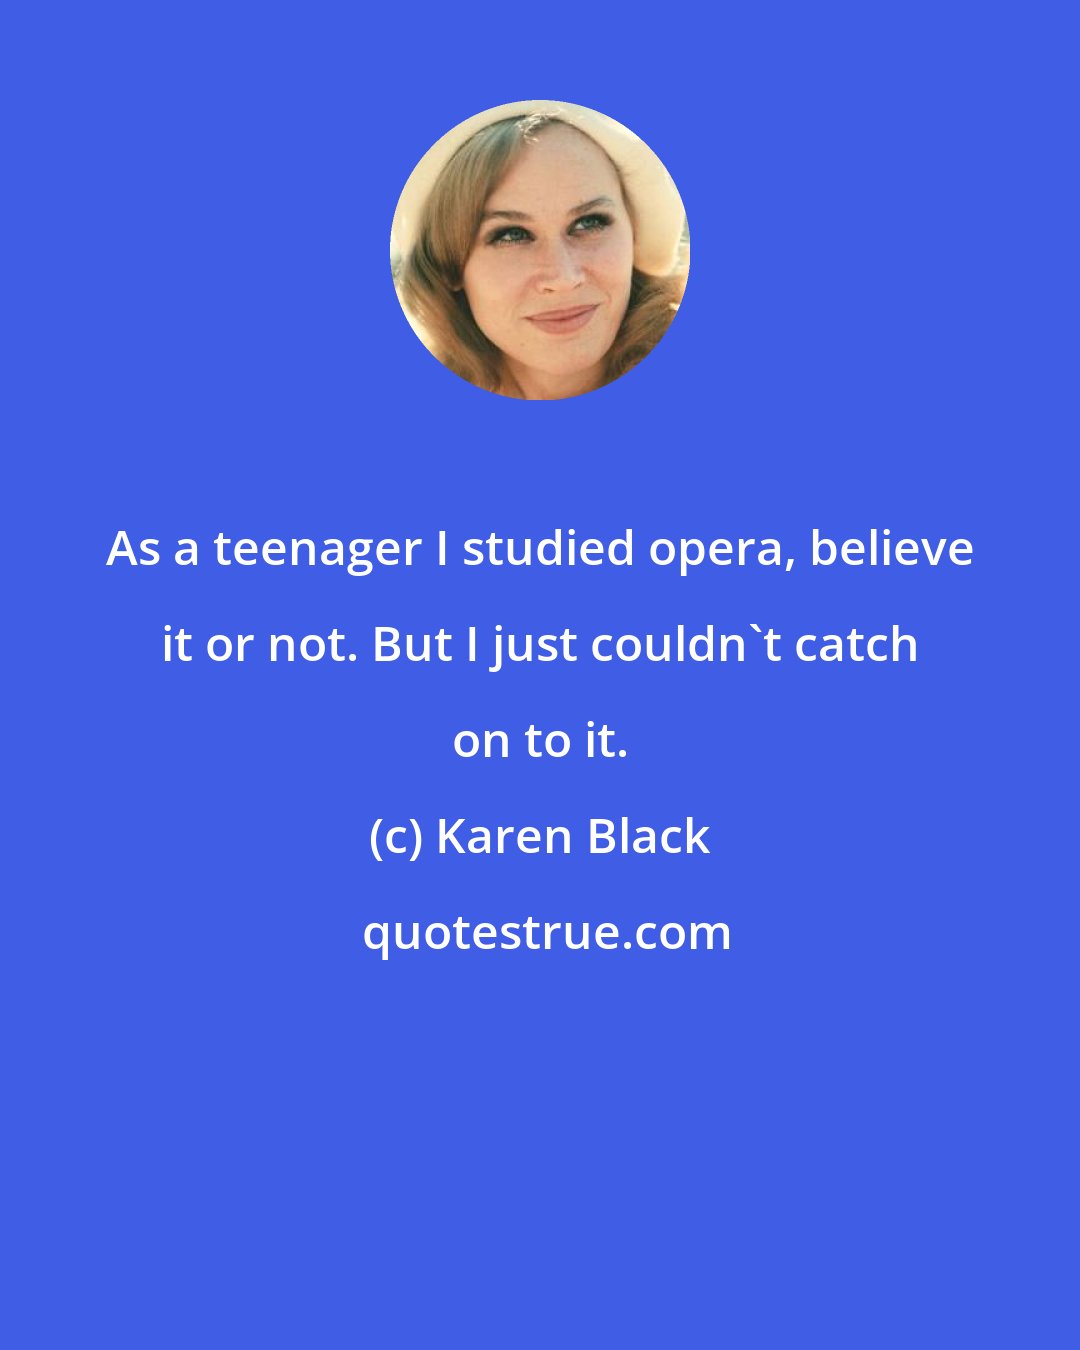 Karen Black: As a teenager I studied opera, believe it or not. But I just couldn't catch on to it.